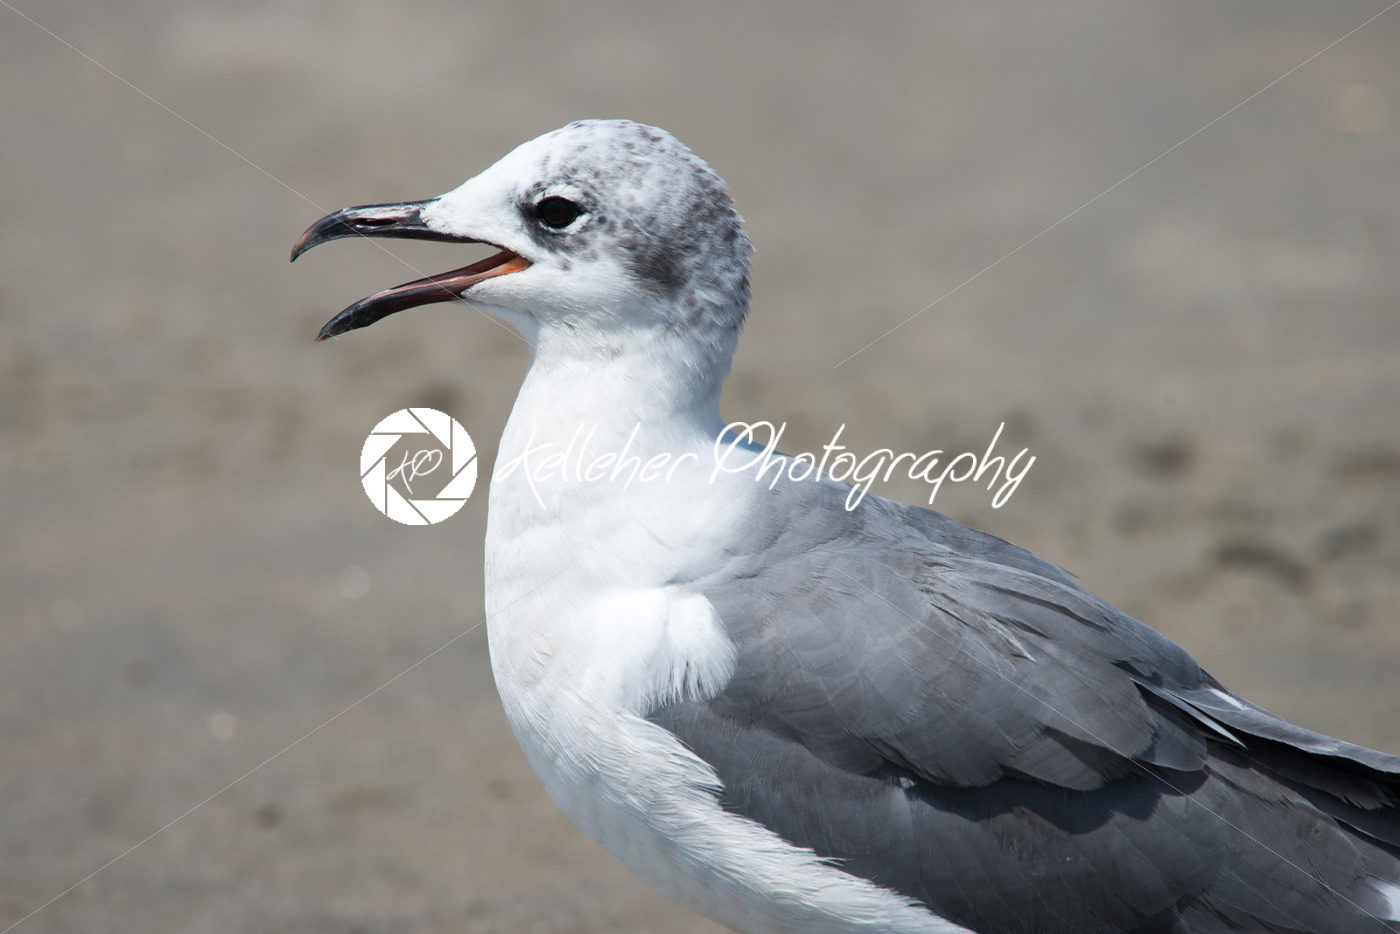 Closeup view of a Seagull on Beach - Kelleher Photography Store